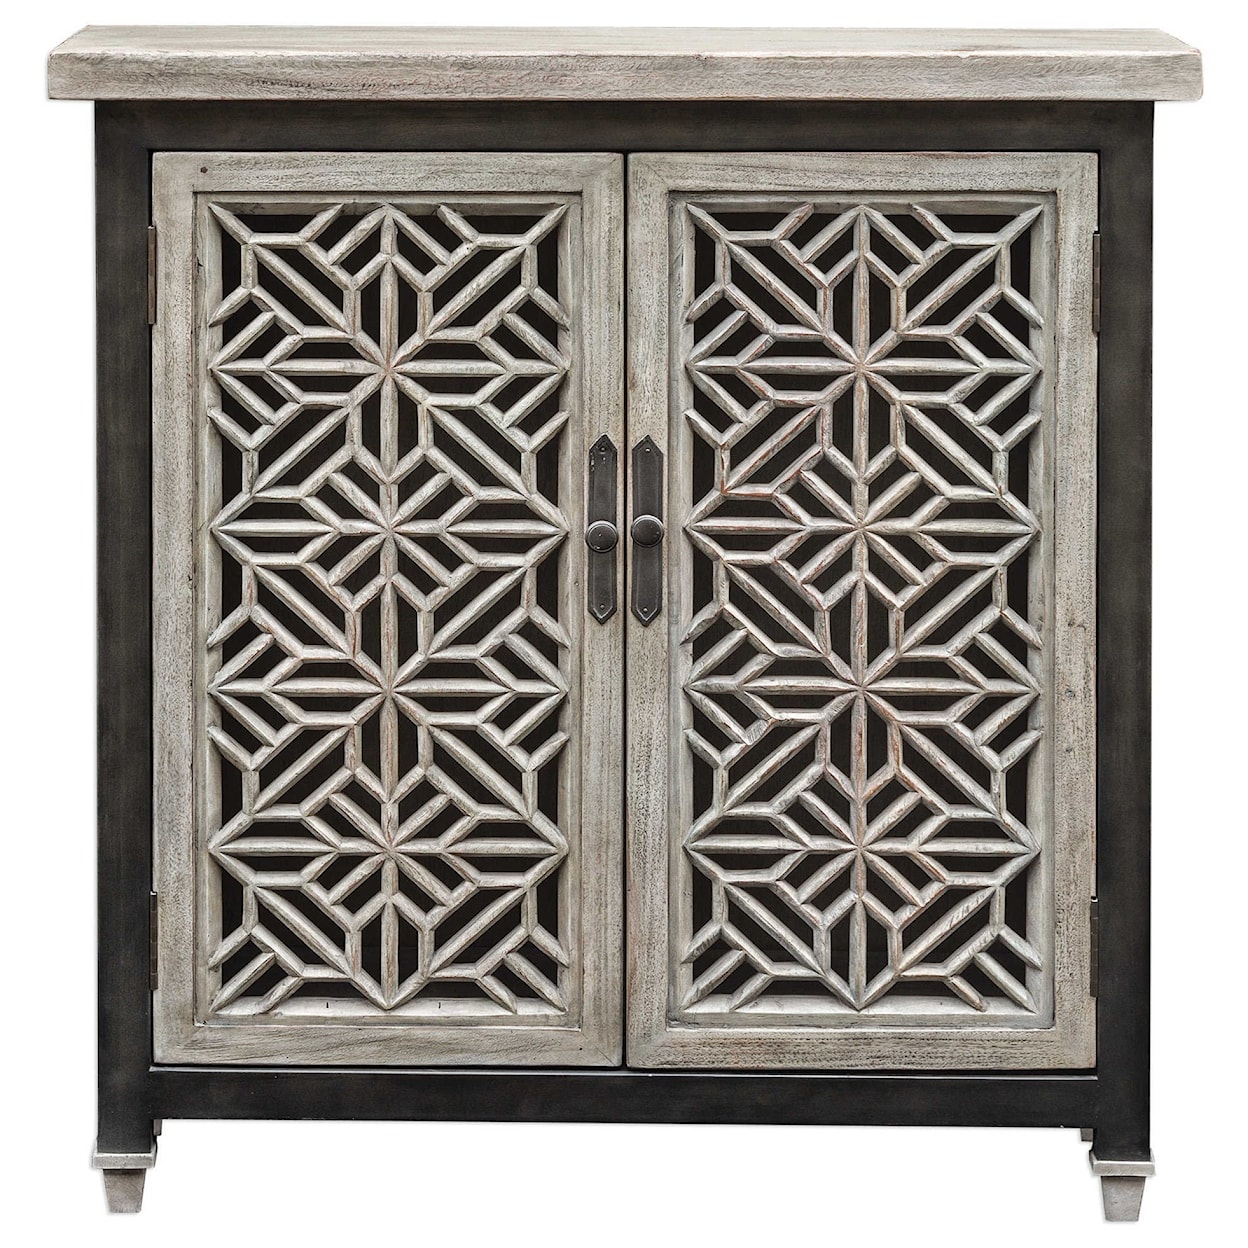 Uttermost Accent Furniture - Chests Branwen Aged White Accent Cabinet